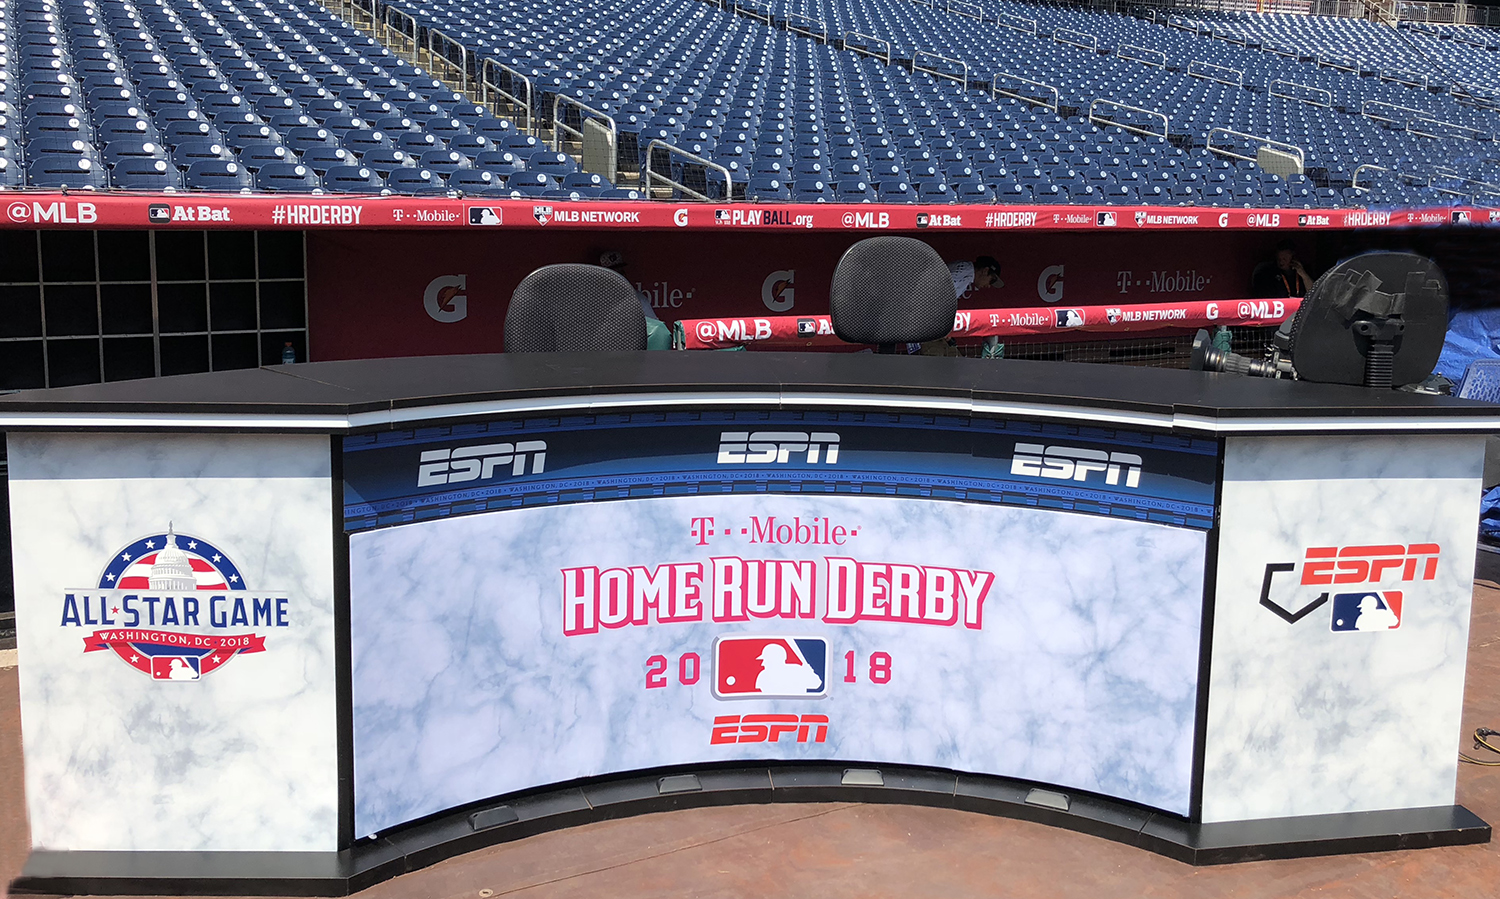 Live From MLB AllStar ESPN Adds New Dimensions to Home Run Derby With